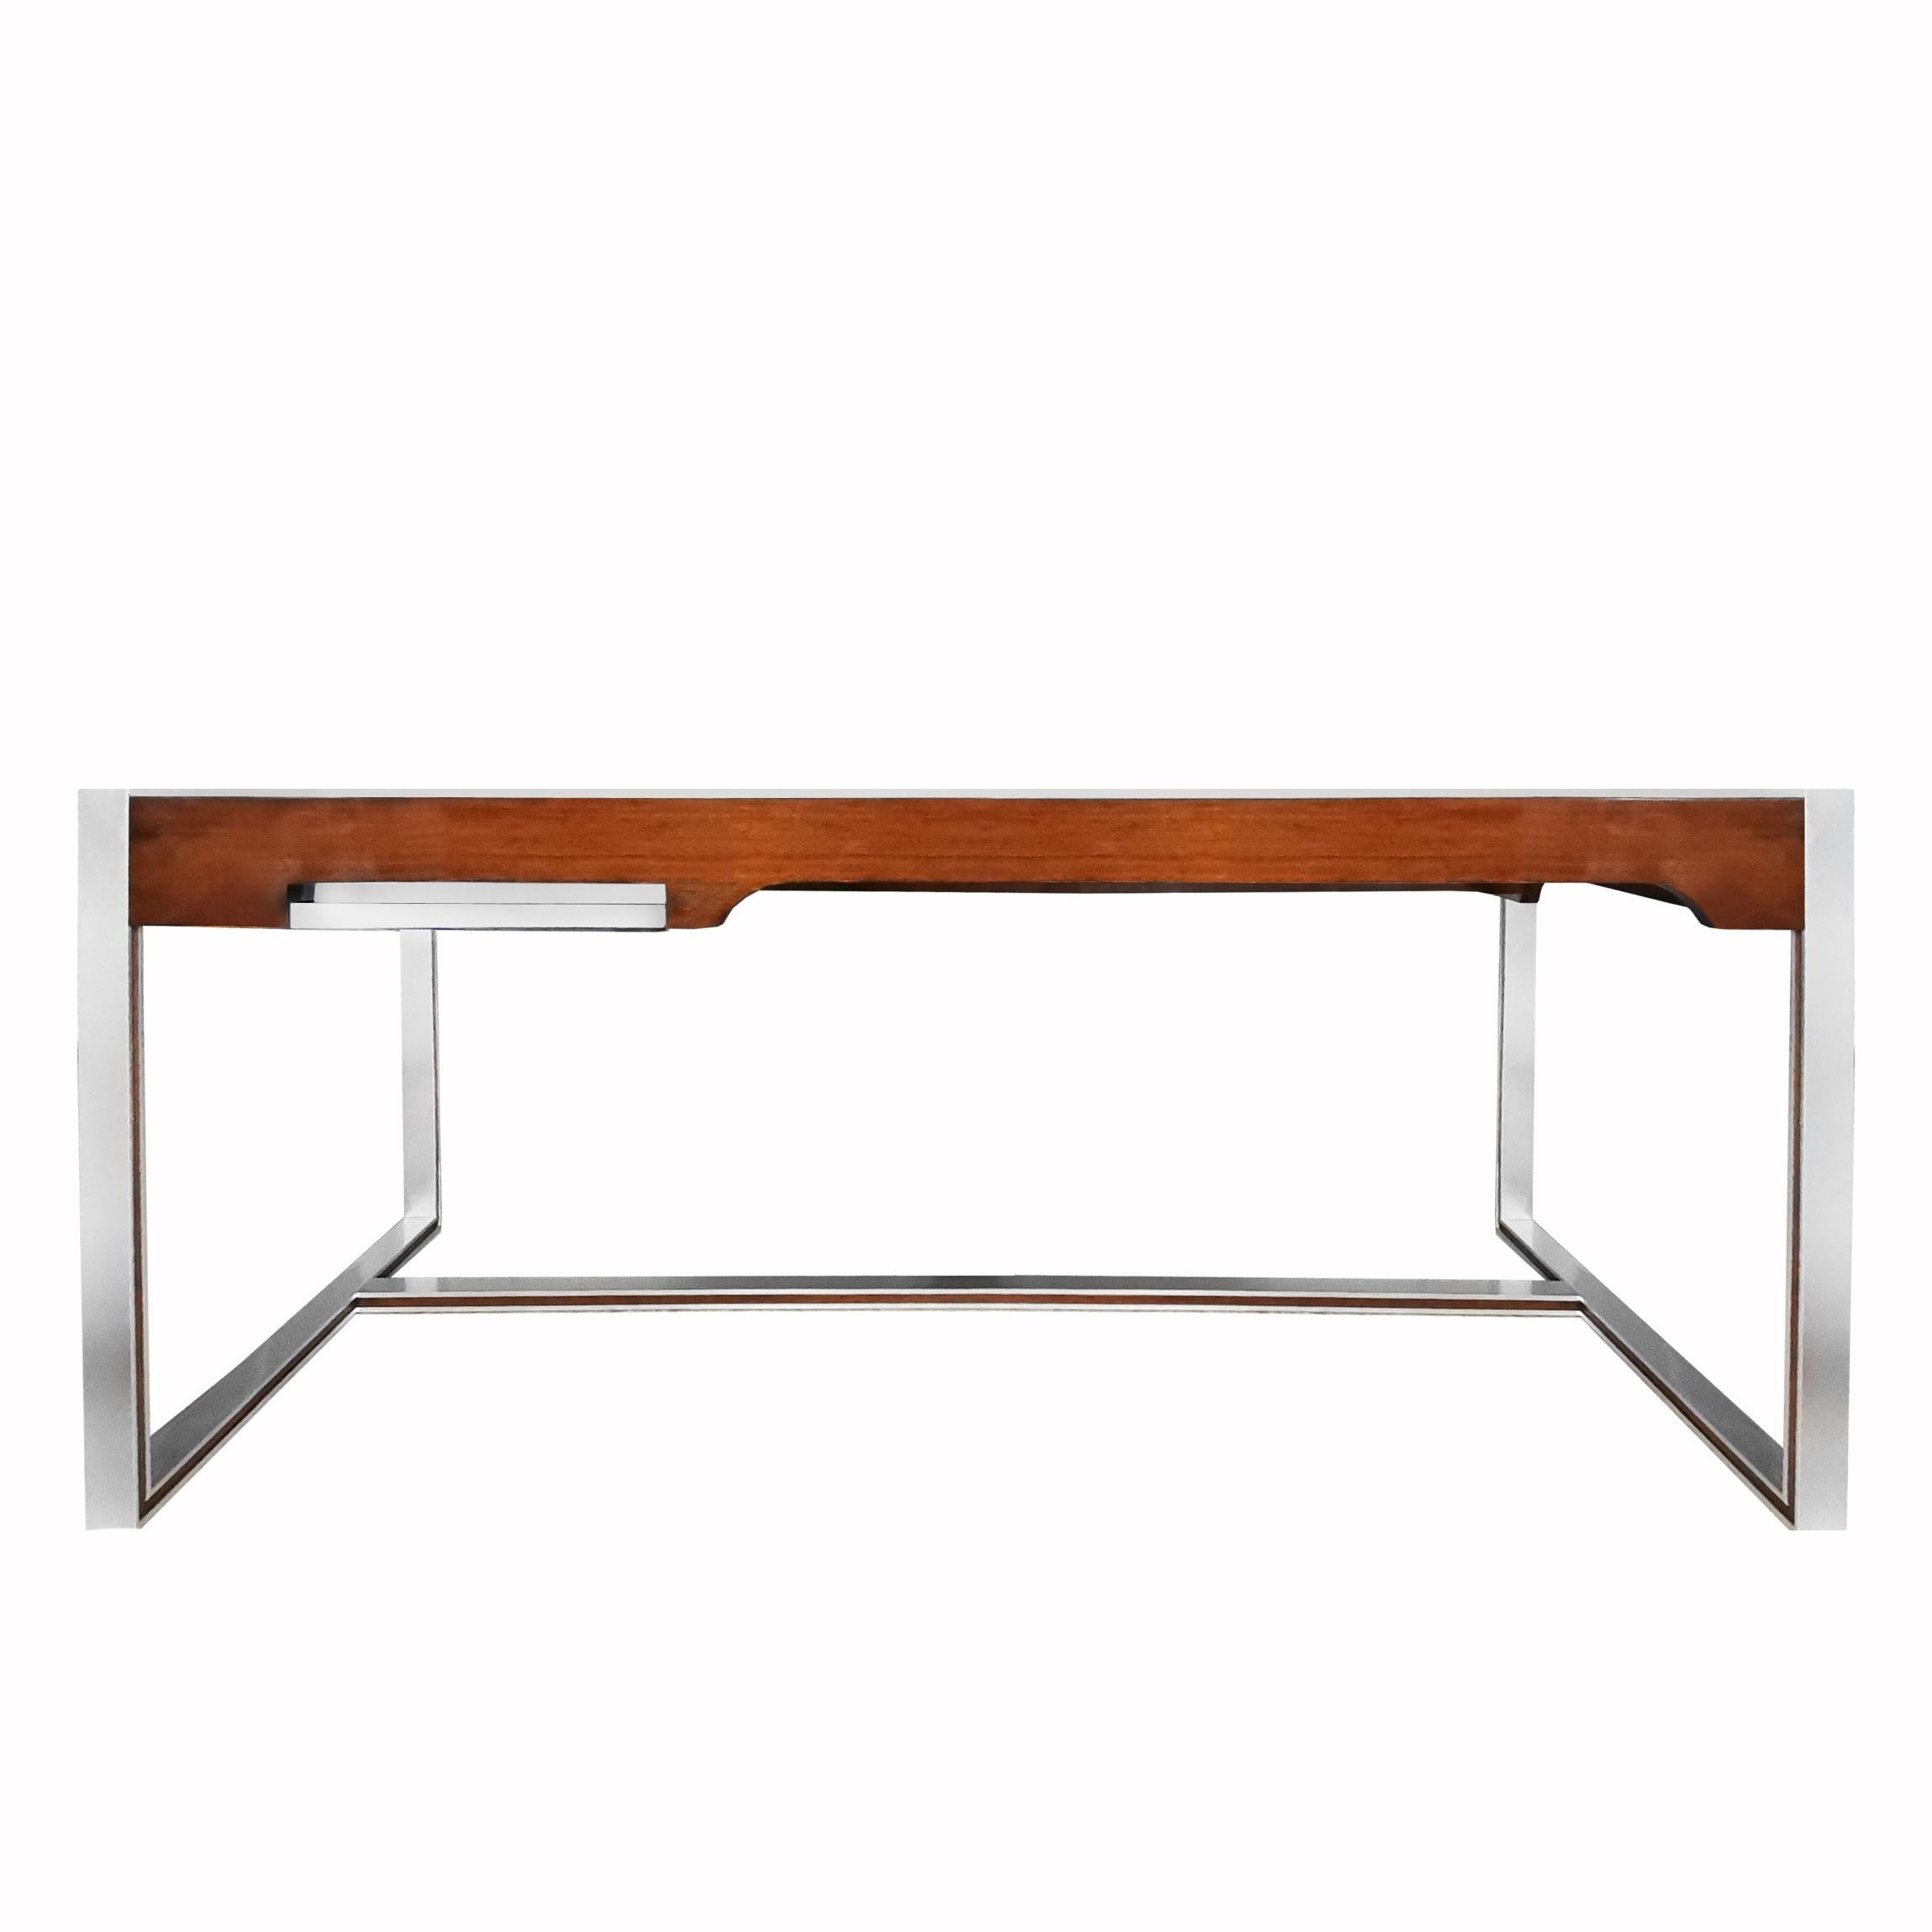 Large flat desk with brushed aluminium frame and French polished mahogany, a compartmentalized drawer opening by a rail system under the thick glass of the top. High quality.
Design: Claude Gaillard
Maker: Ligne Roset

France c. 1970.